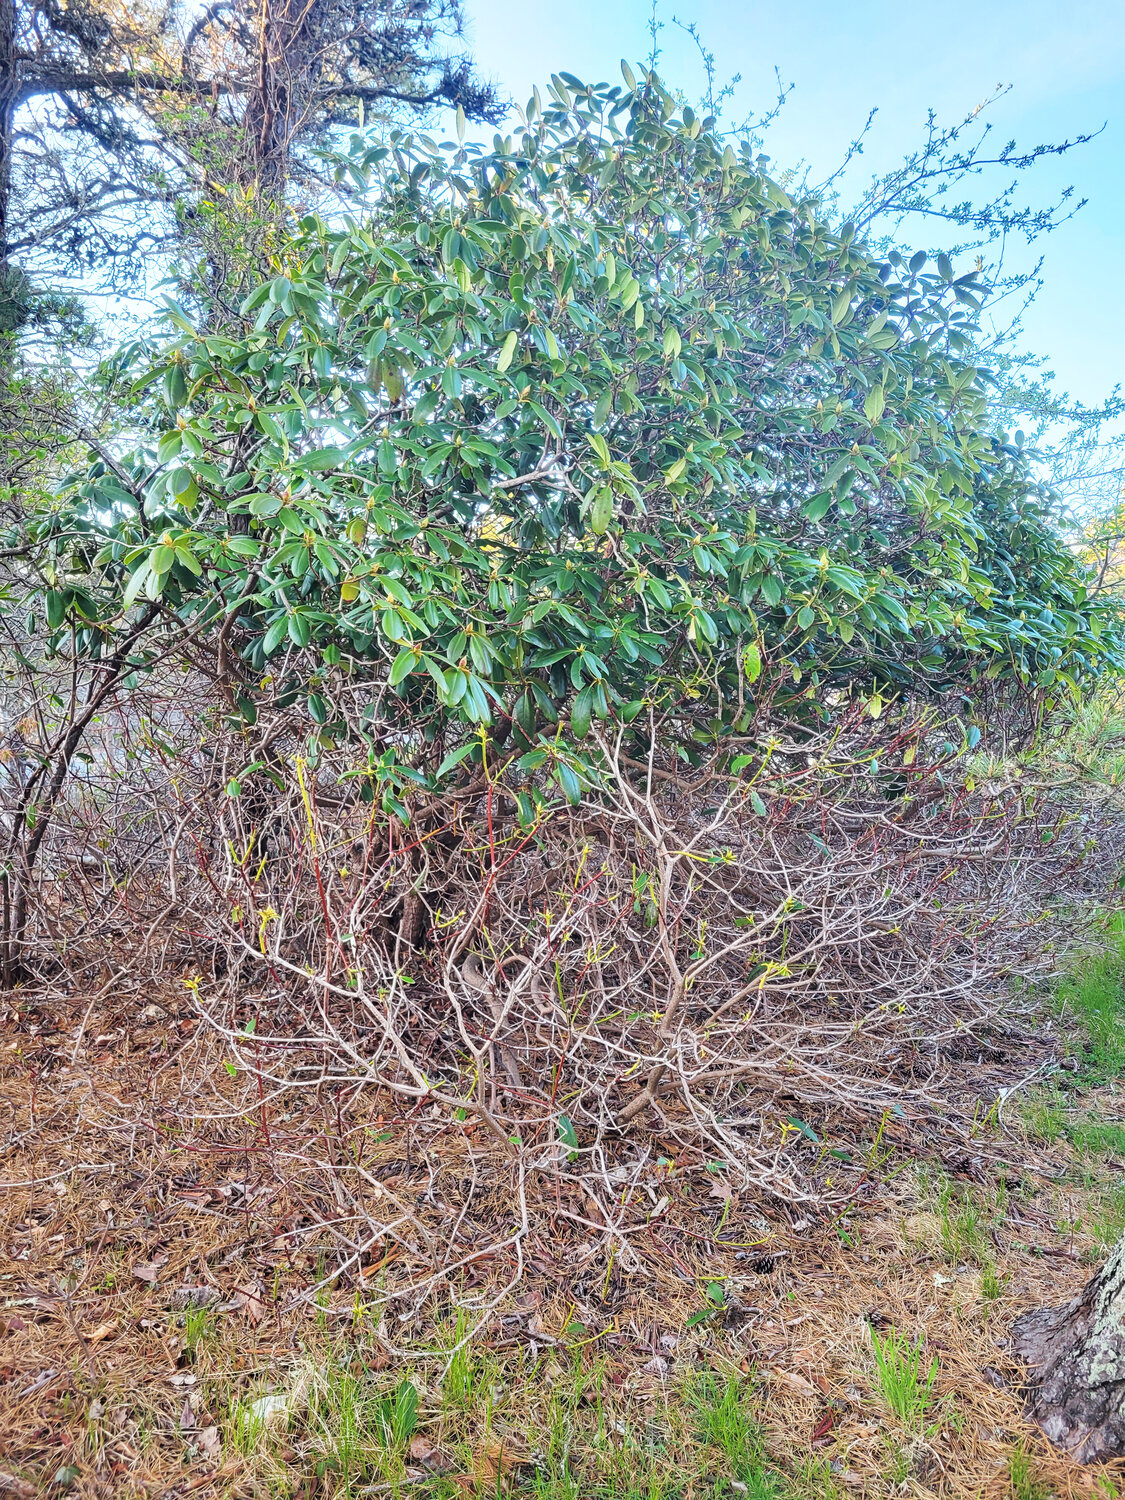 The deer-ravaged lower half of a rhododendron bush.